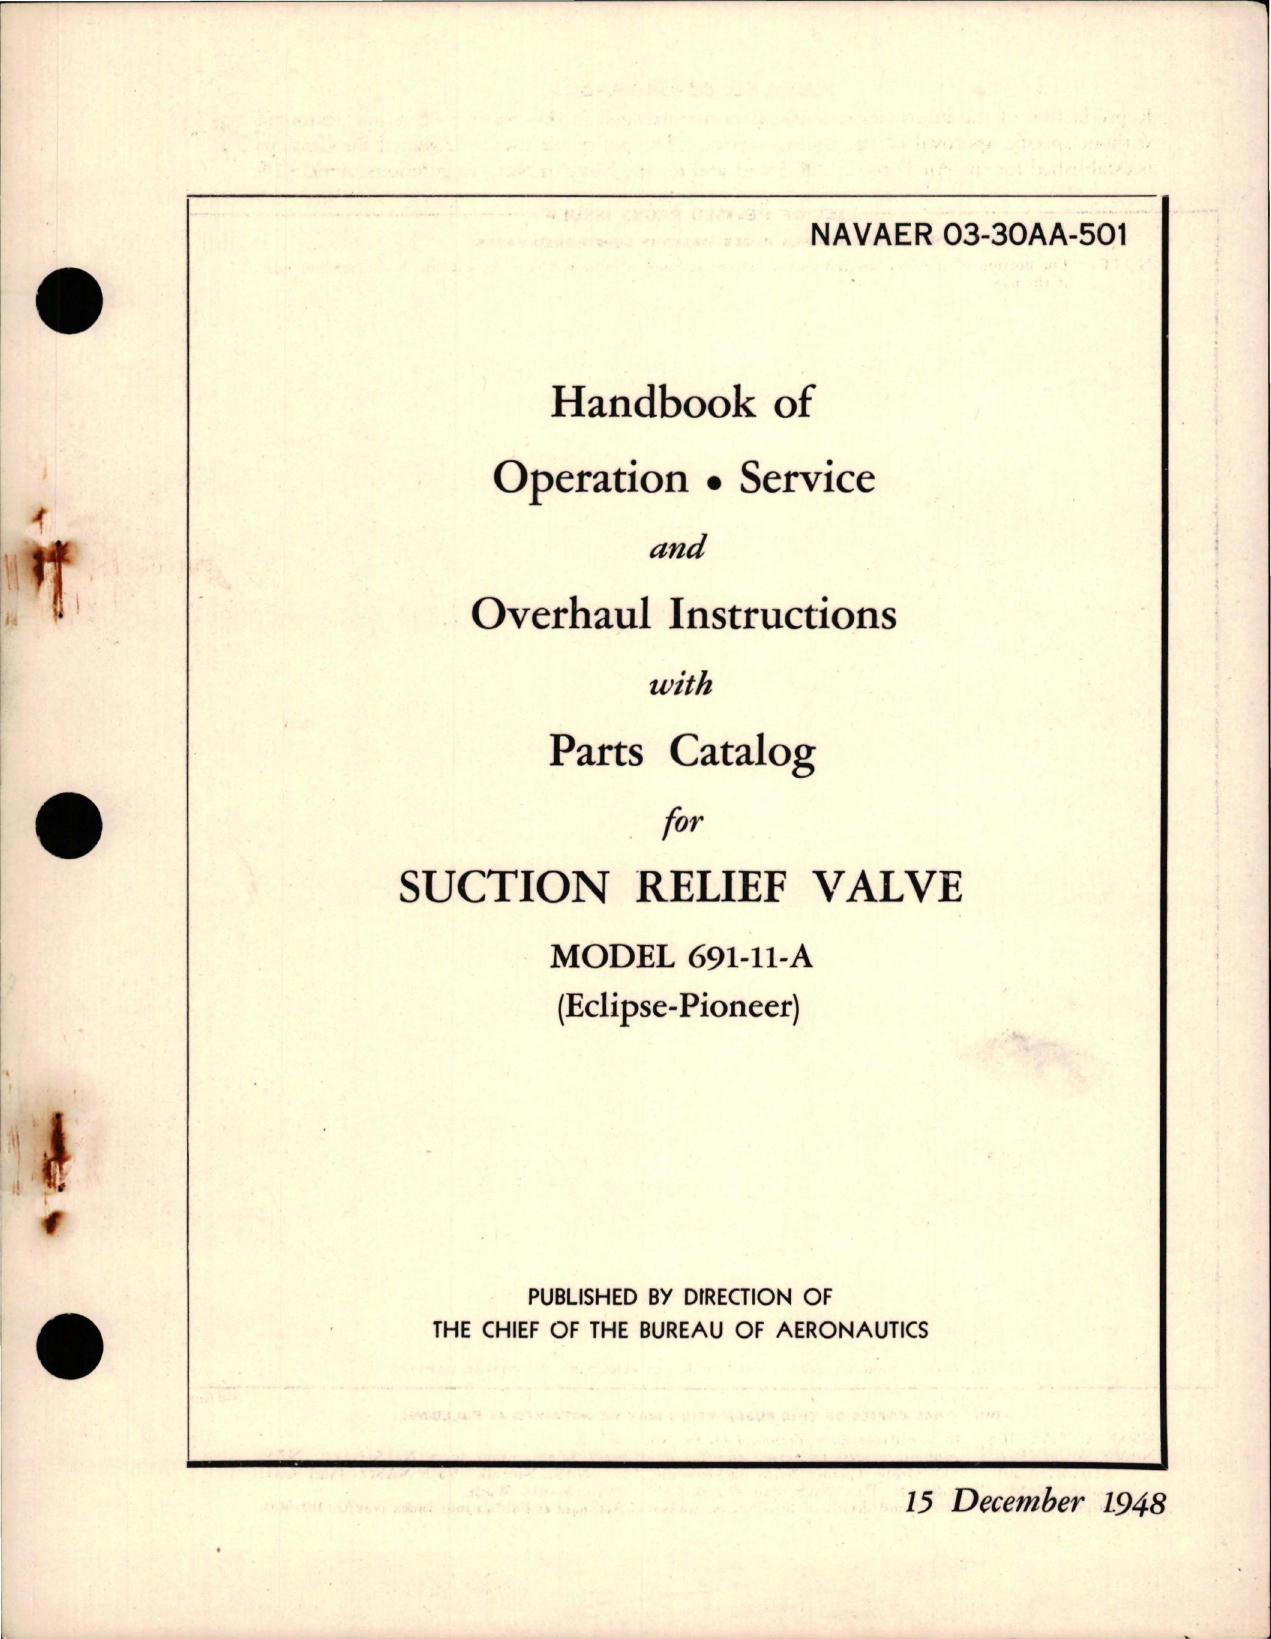 Sample page 1 from AirCorps Library document: Operation, Service and Overhaul Instructions with Parts Catalog for Suction Relief Valve - Model 691-11-A